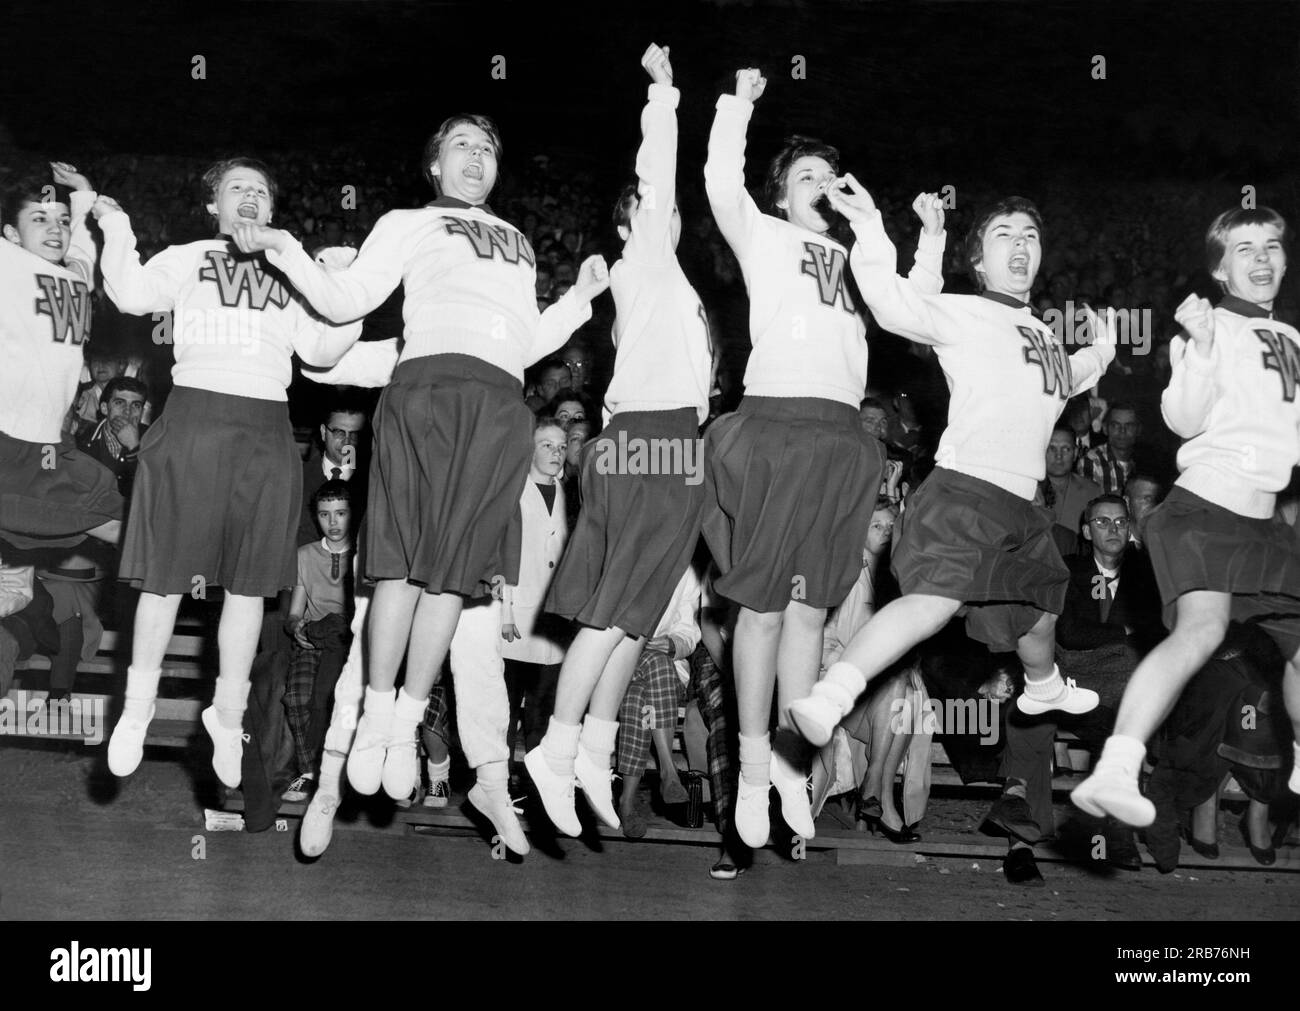 Waukegan, Illinois:  March 18, 1959 Waukegan cheerleaders jump for joy as their team stages a last second win. Stock Photo